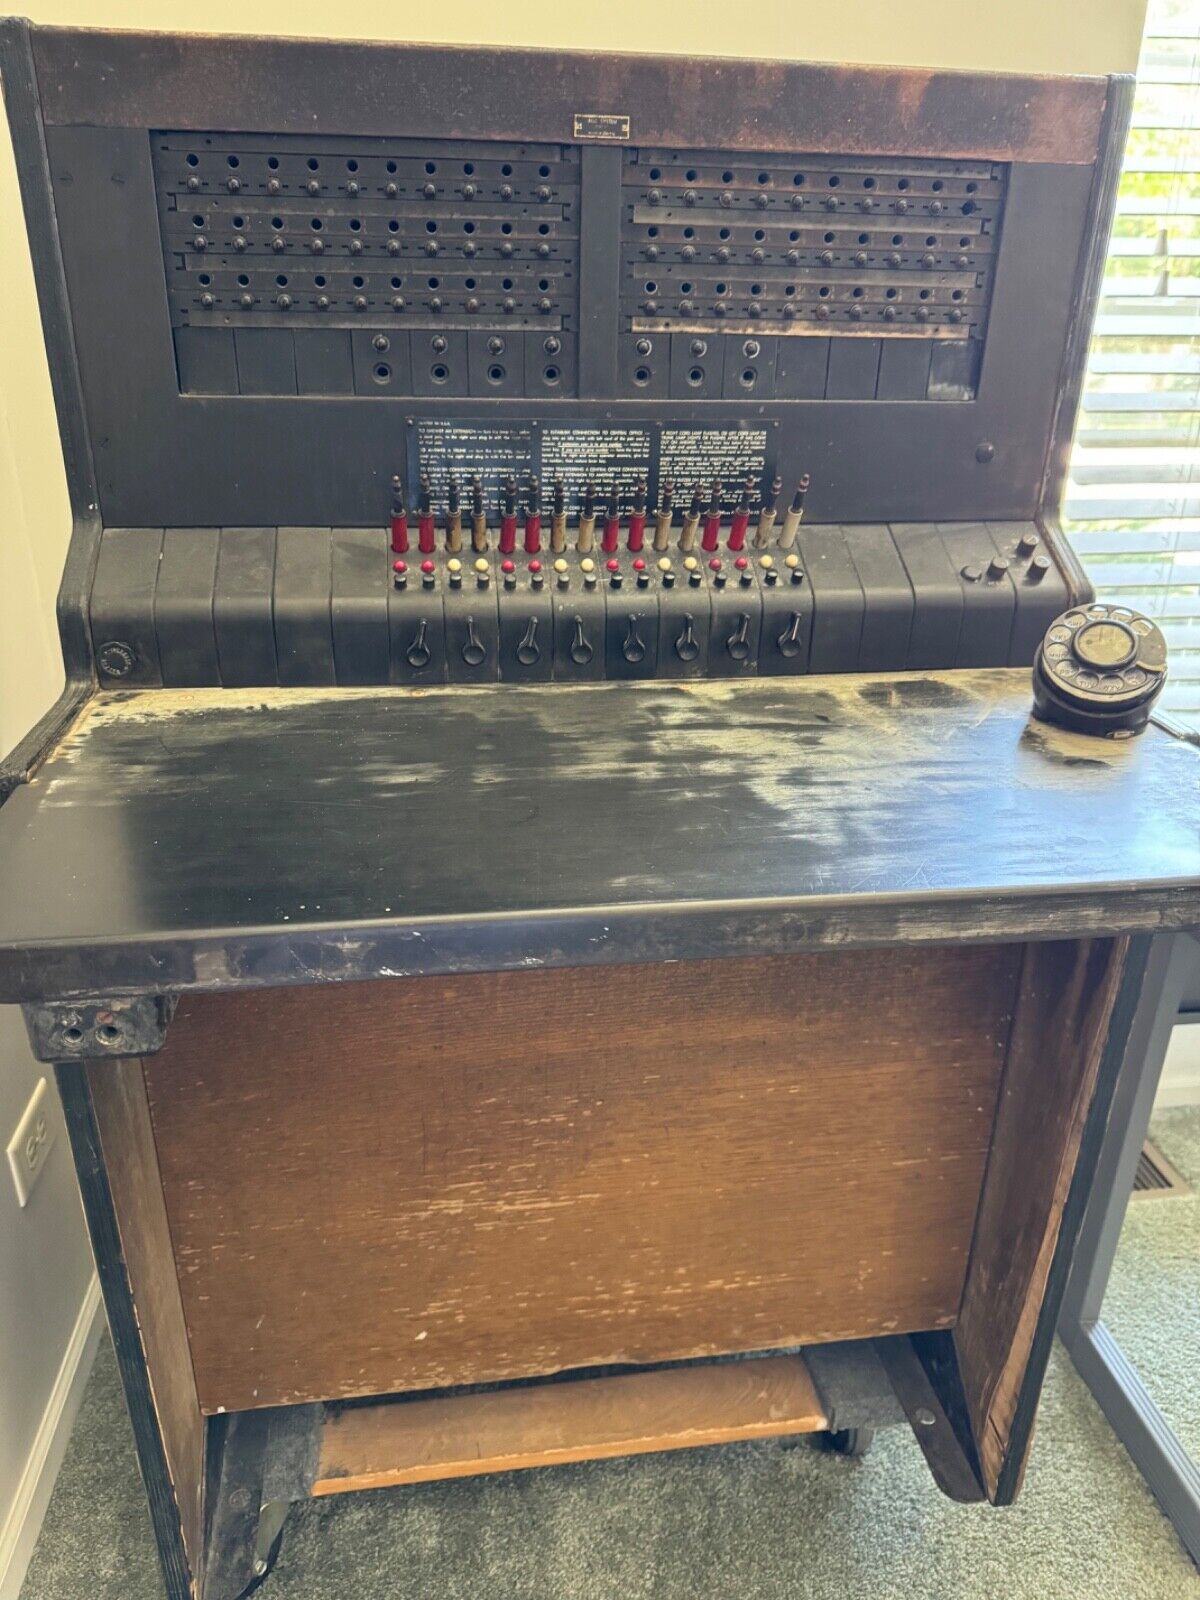 ANTIQUE WESTERN ELECTRIC TELEPHONE SWITCHBOARD CONSOLE